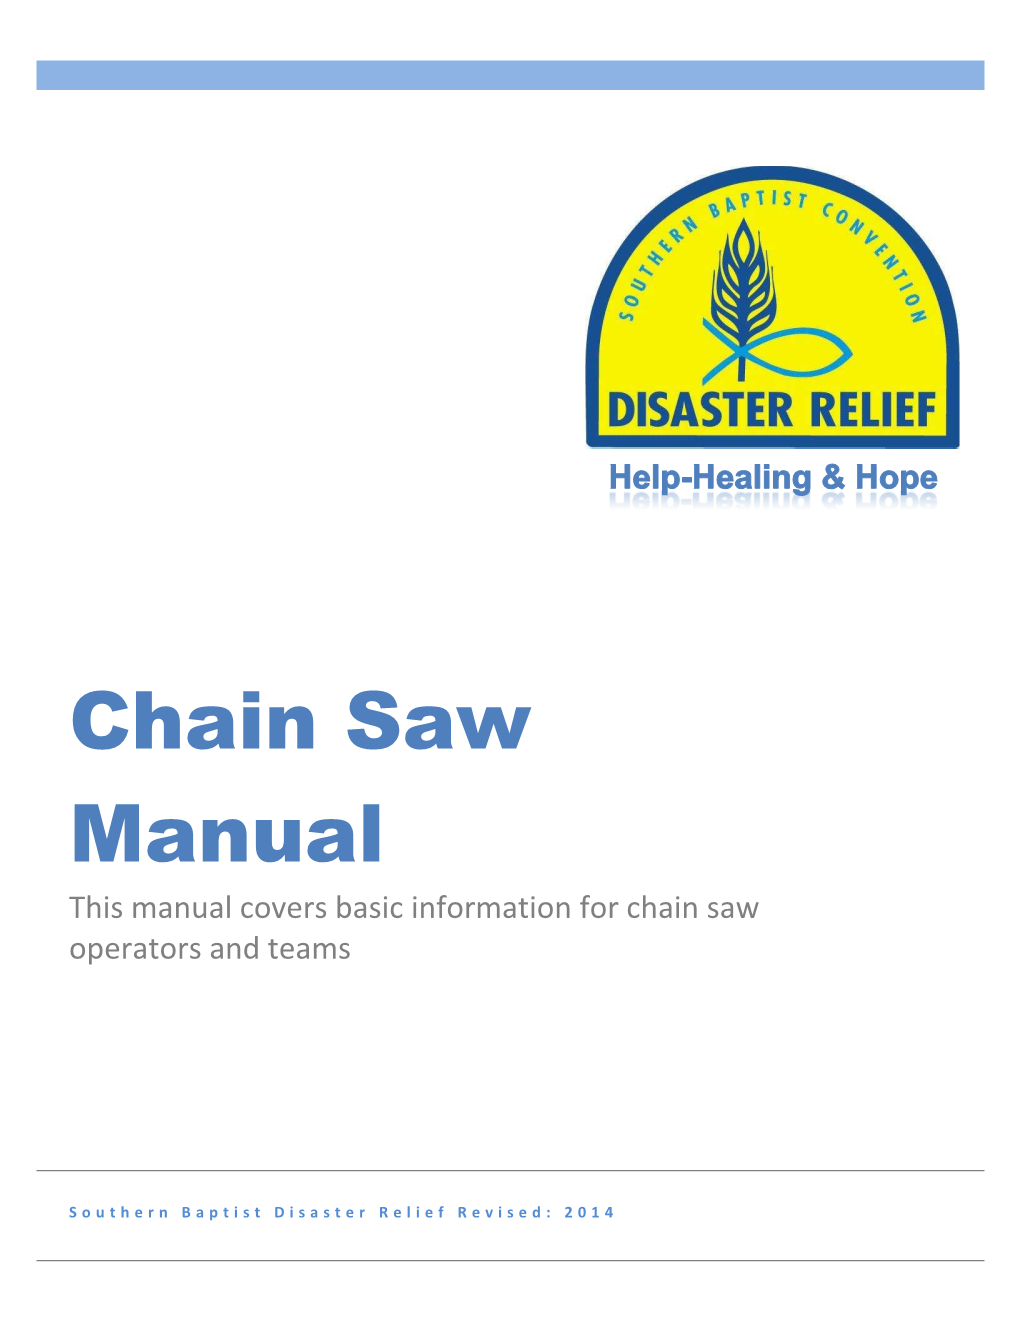 Chain Saw Manual This Manual Covers Basic Information for Chain Saw Operators and Teams